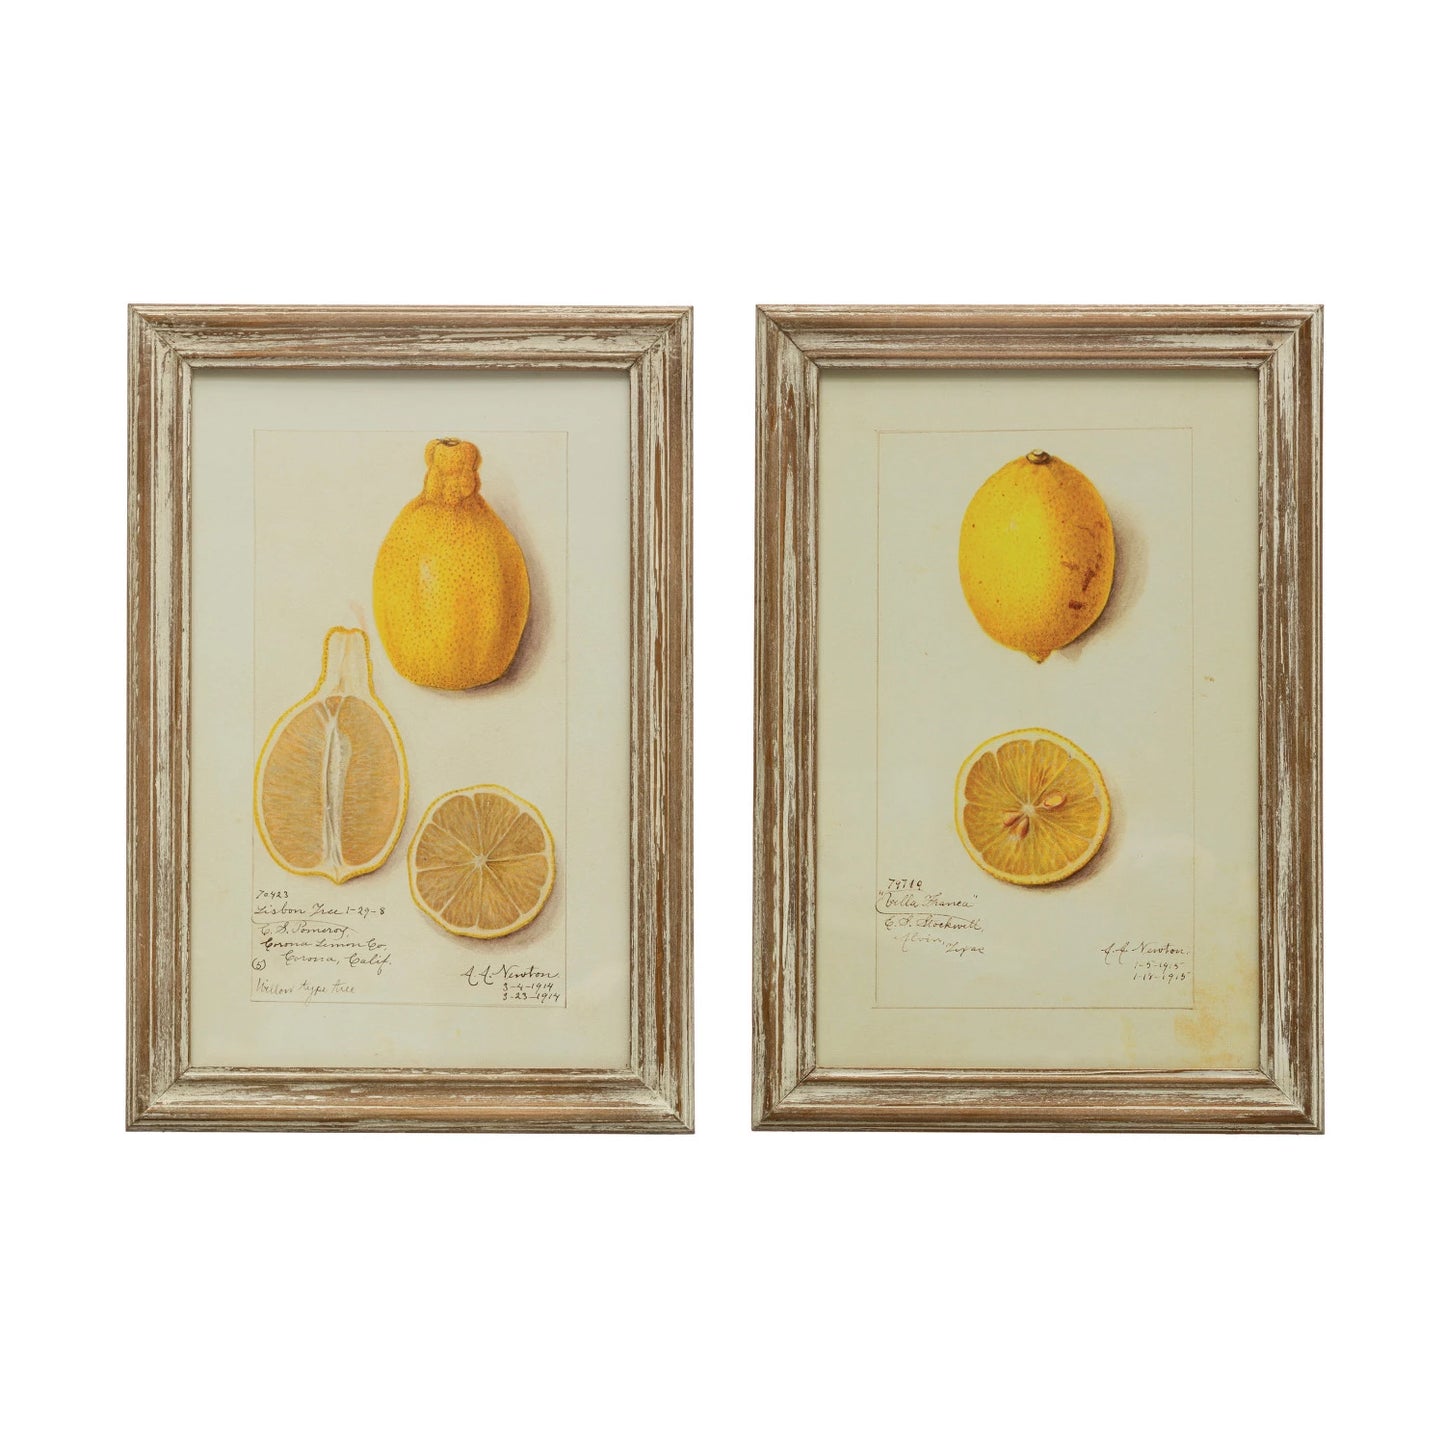 Wood Framed Glass Wall Décor w/ Vintage Reproduction Lemons Image, Distressed Finish, 2 Styles